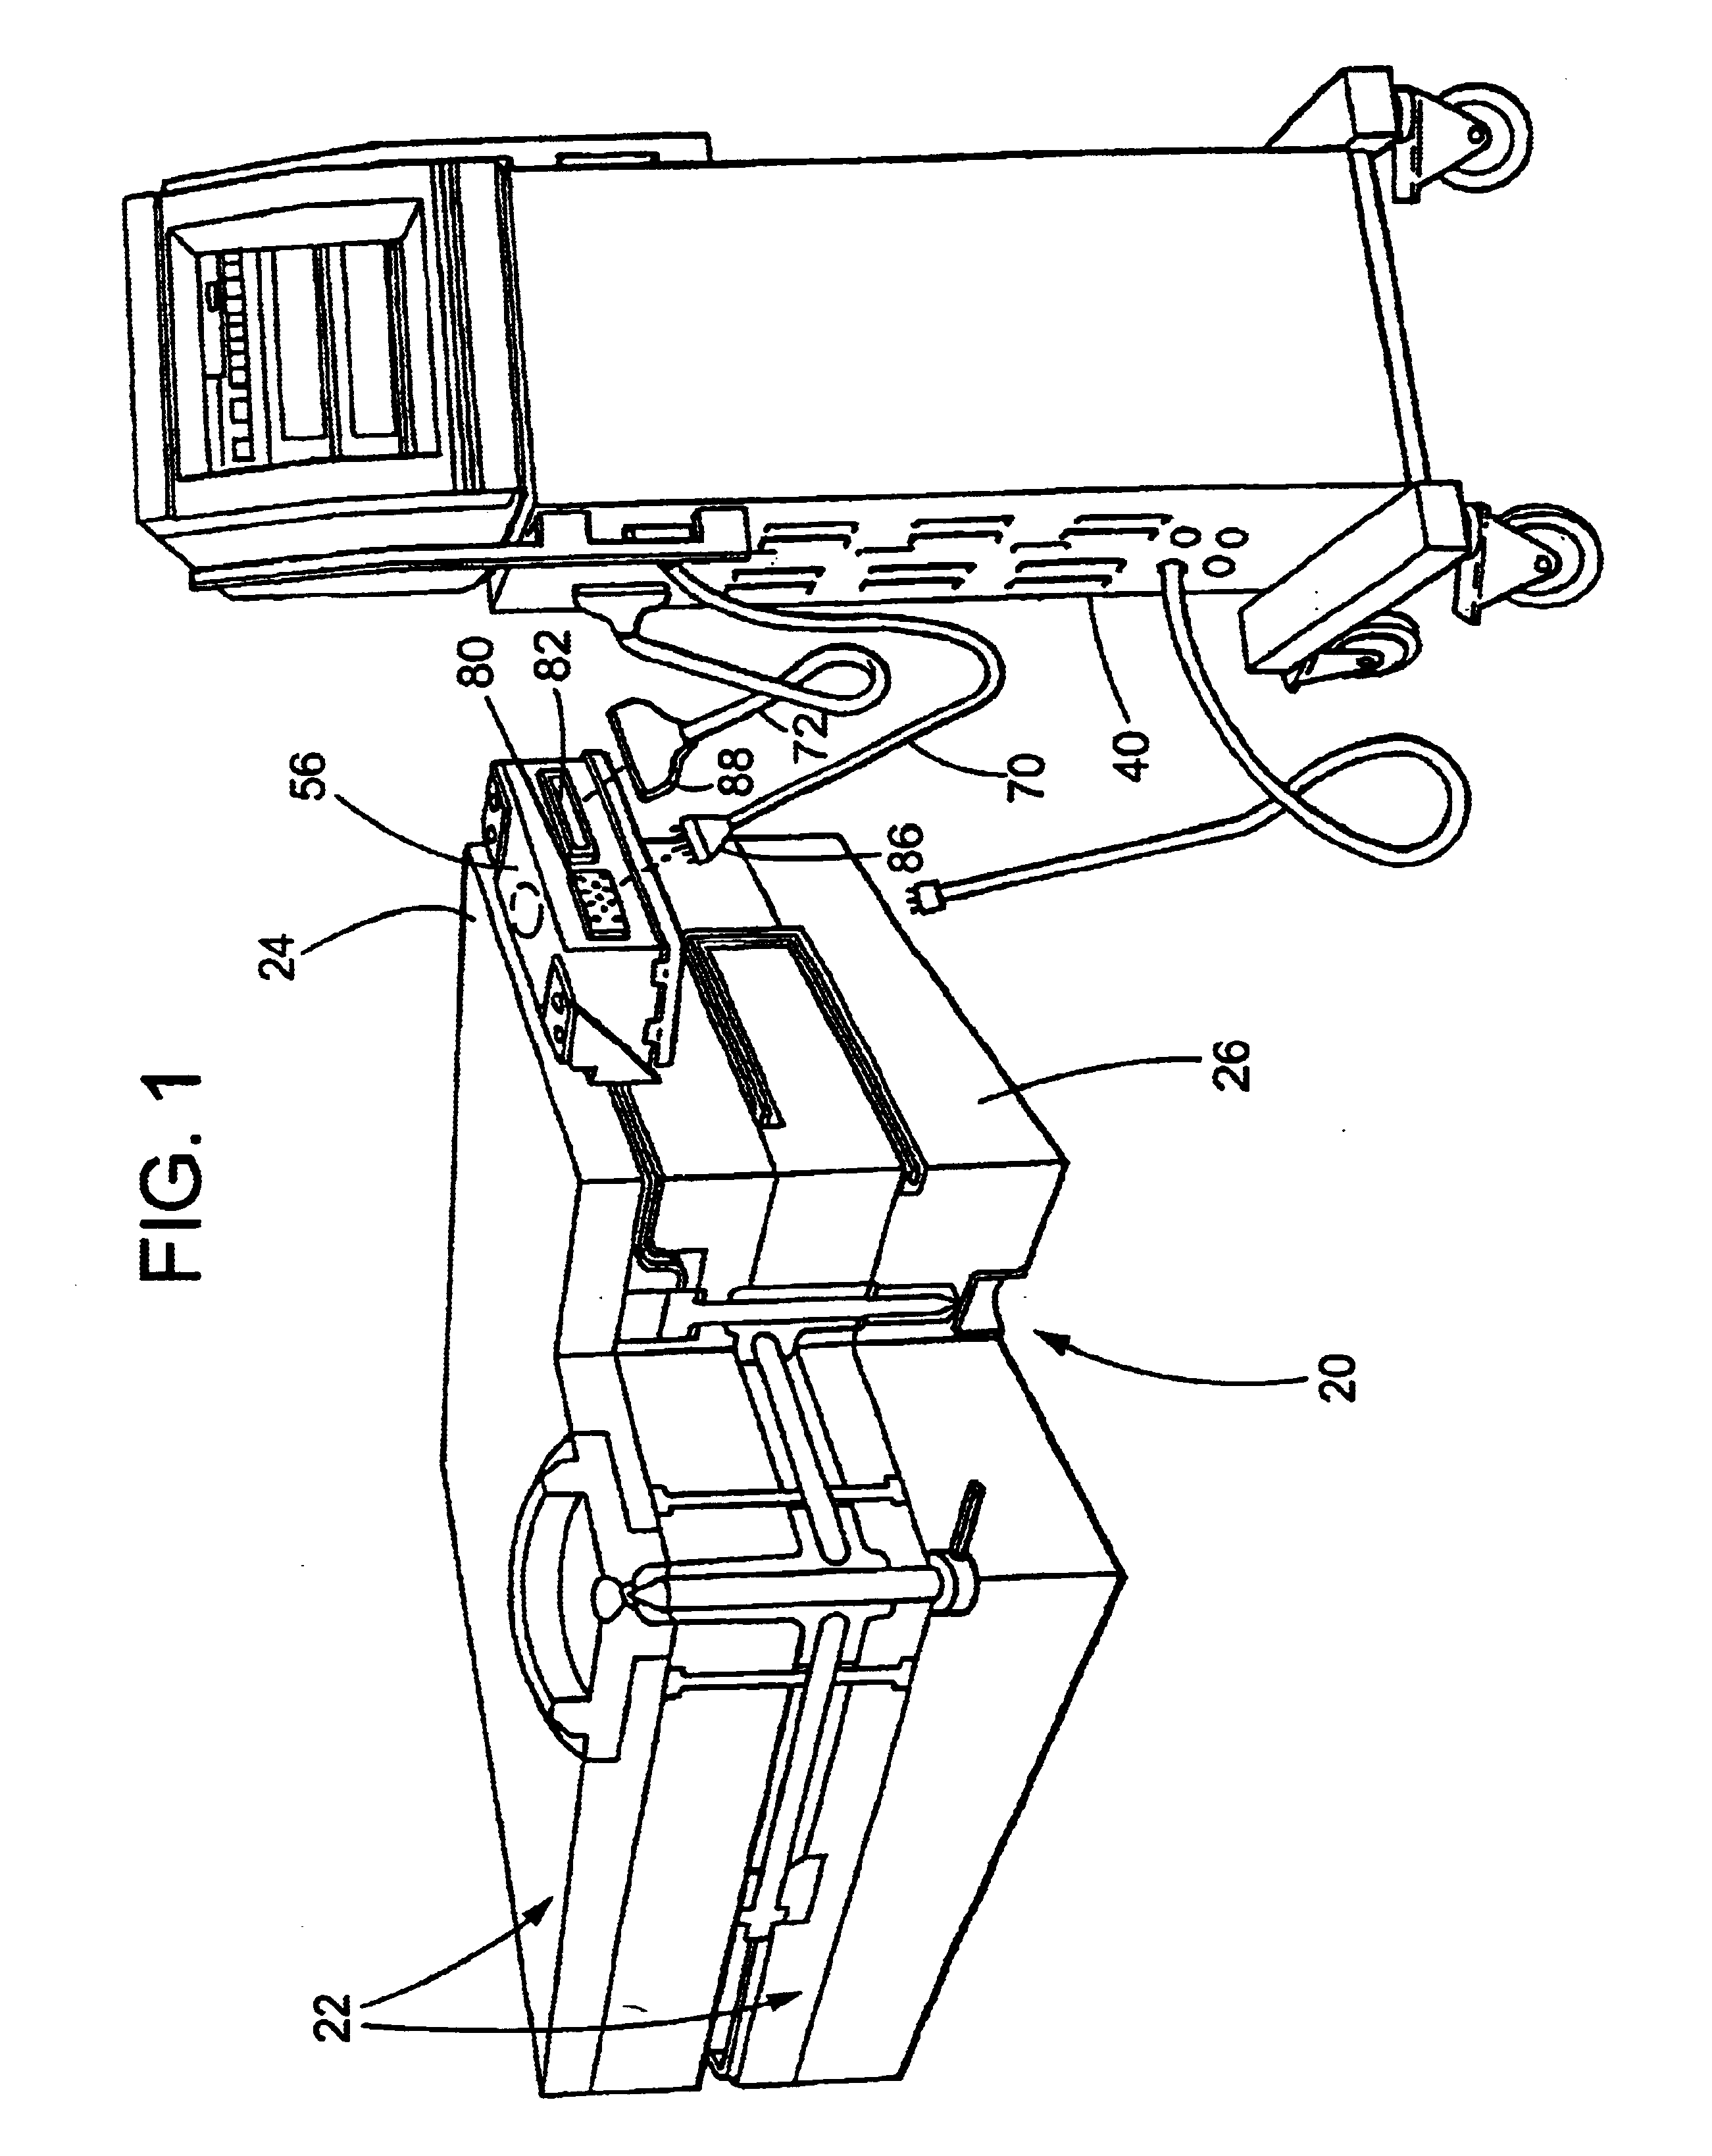 Apparatus for protecting thermocouple circuits in thermoplastic injection moulding equipment